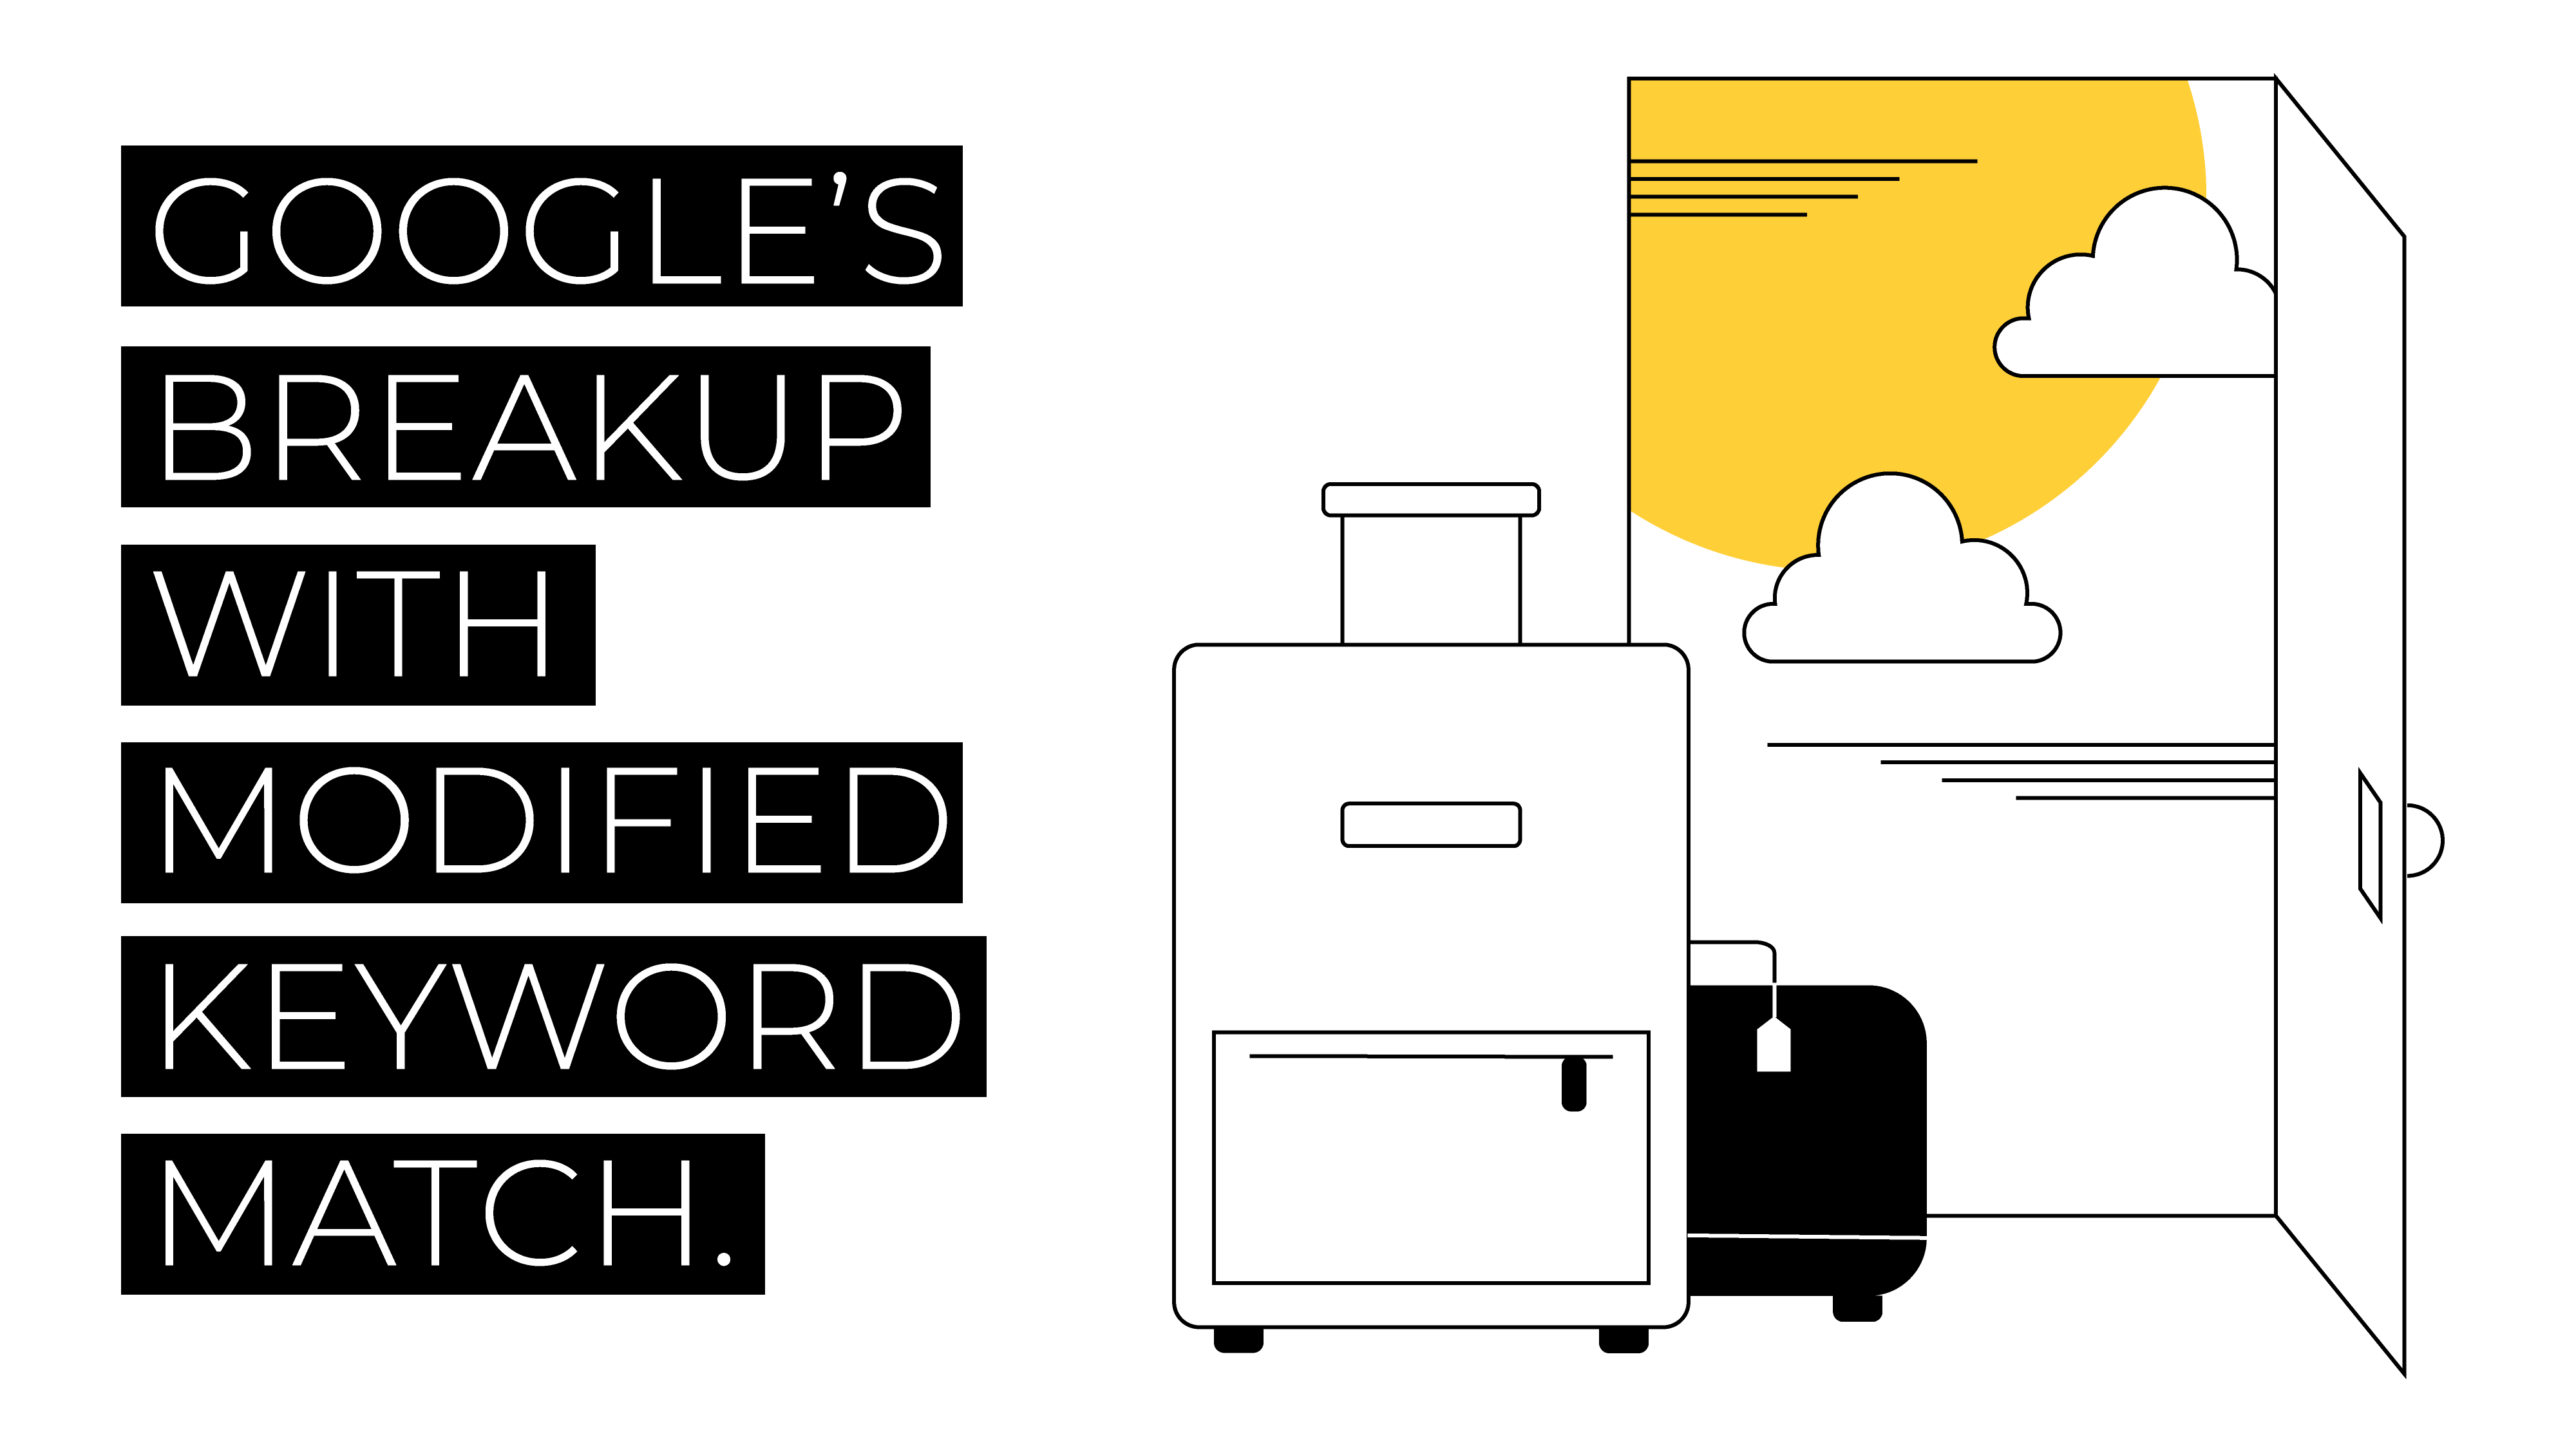 Google’s Breakup with Modified Keyword Match.